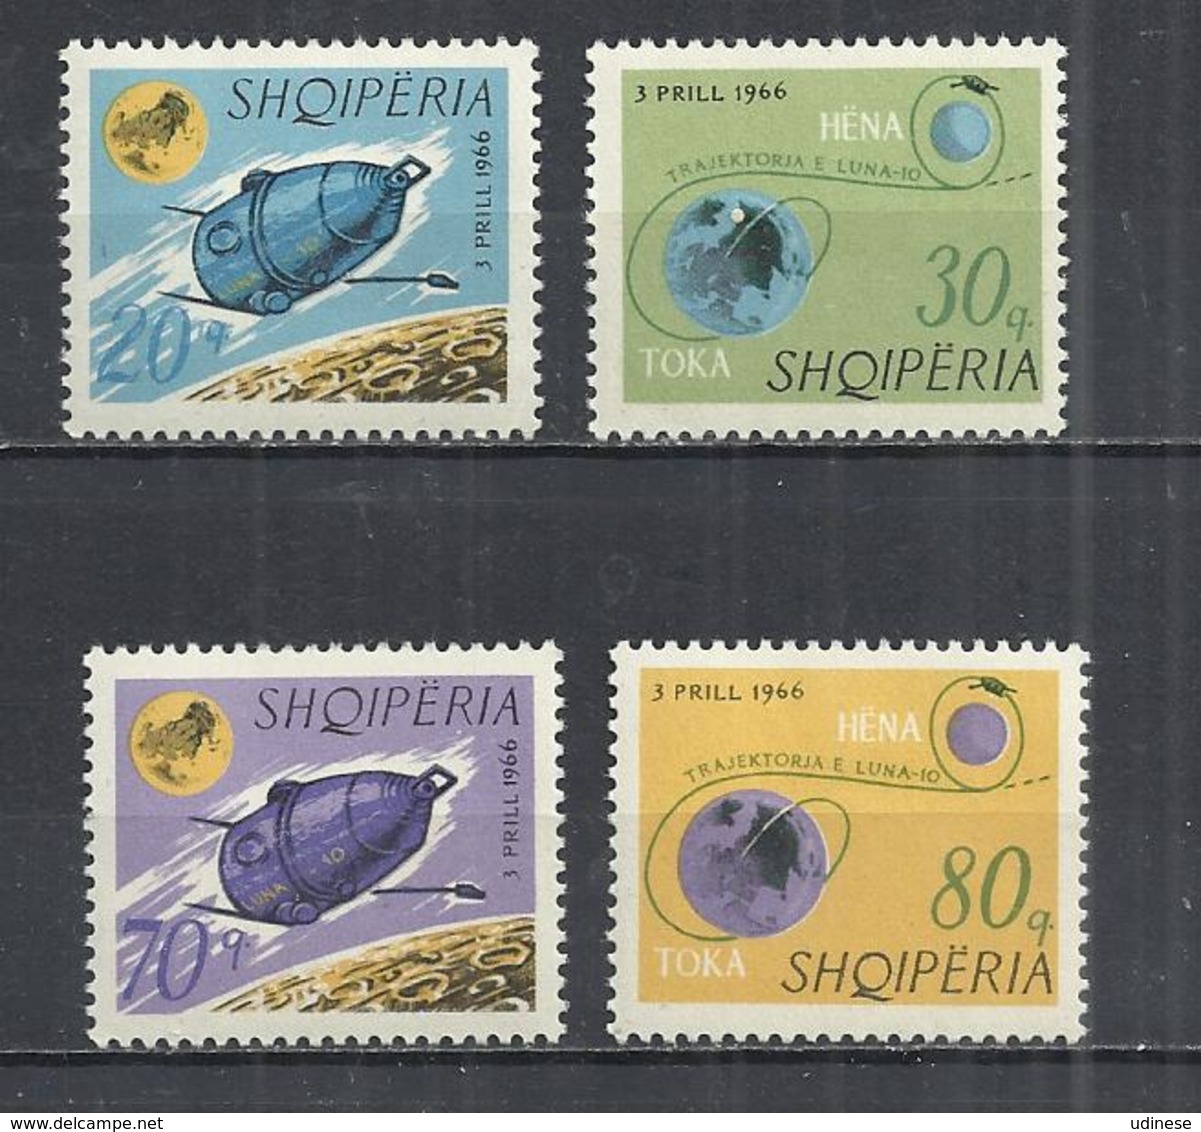 ALBANIA 1966 -  LAUNCHING OF THE 1st ARTIFICIAL  MOON SATELLITE, LUNA 10 -  CPL. SET - MNH MINT NEUF NUEVO - Europe